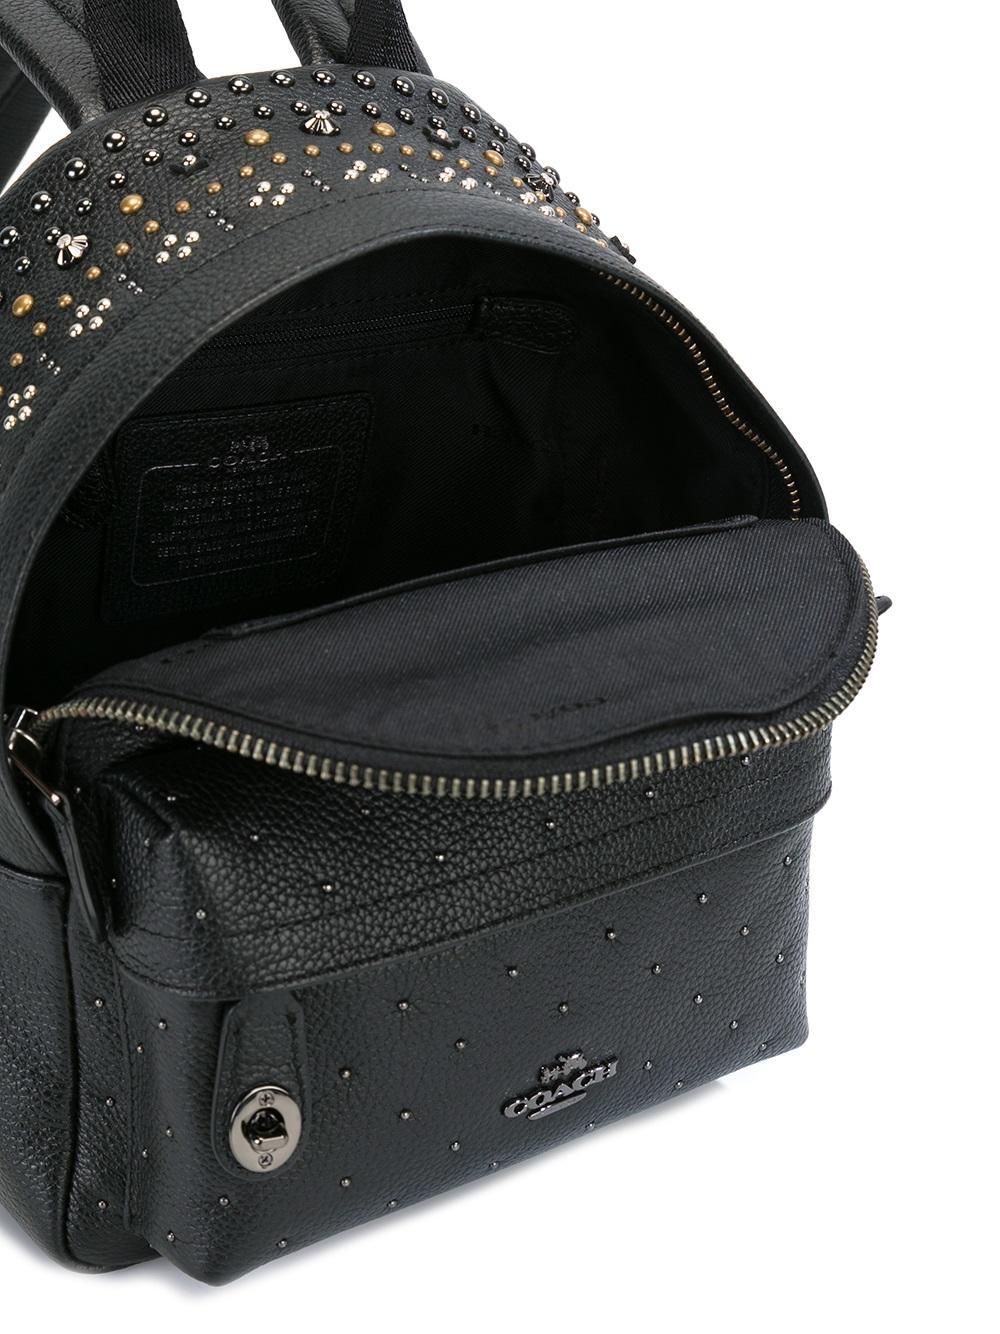 Coach Mini Studded Backpack in Black | Lyst